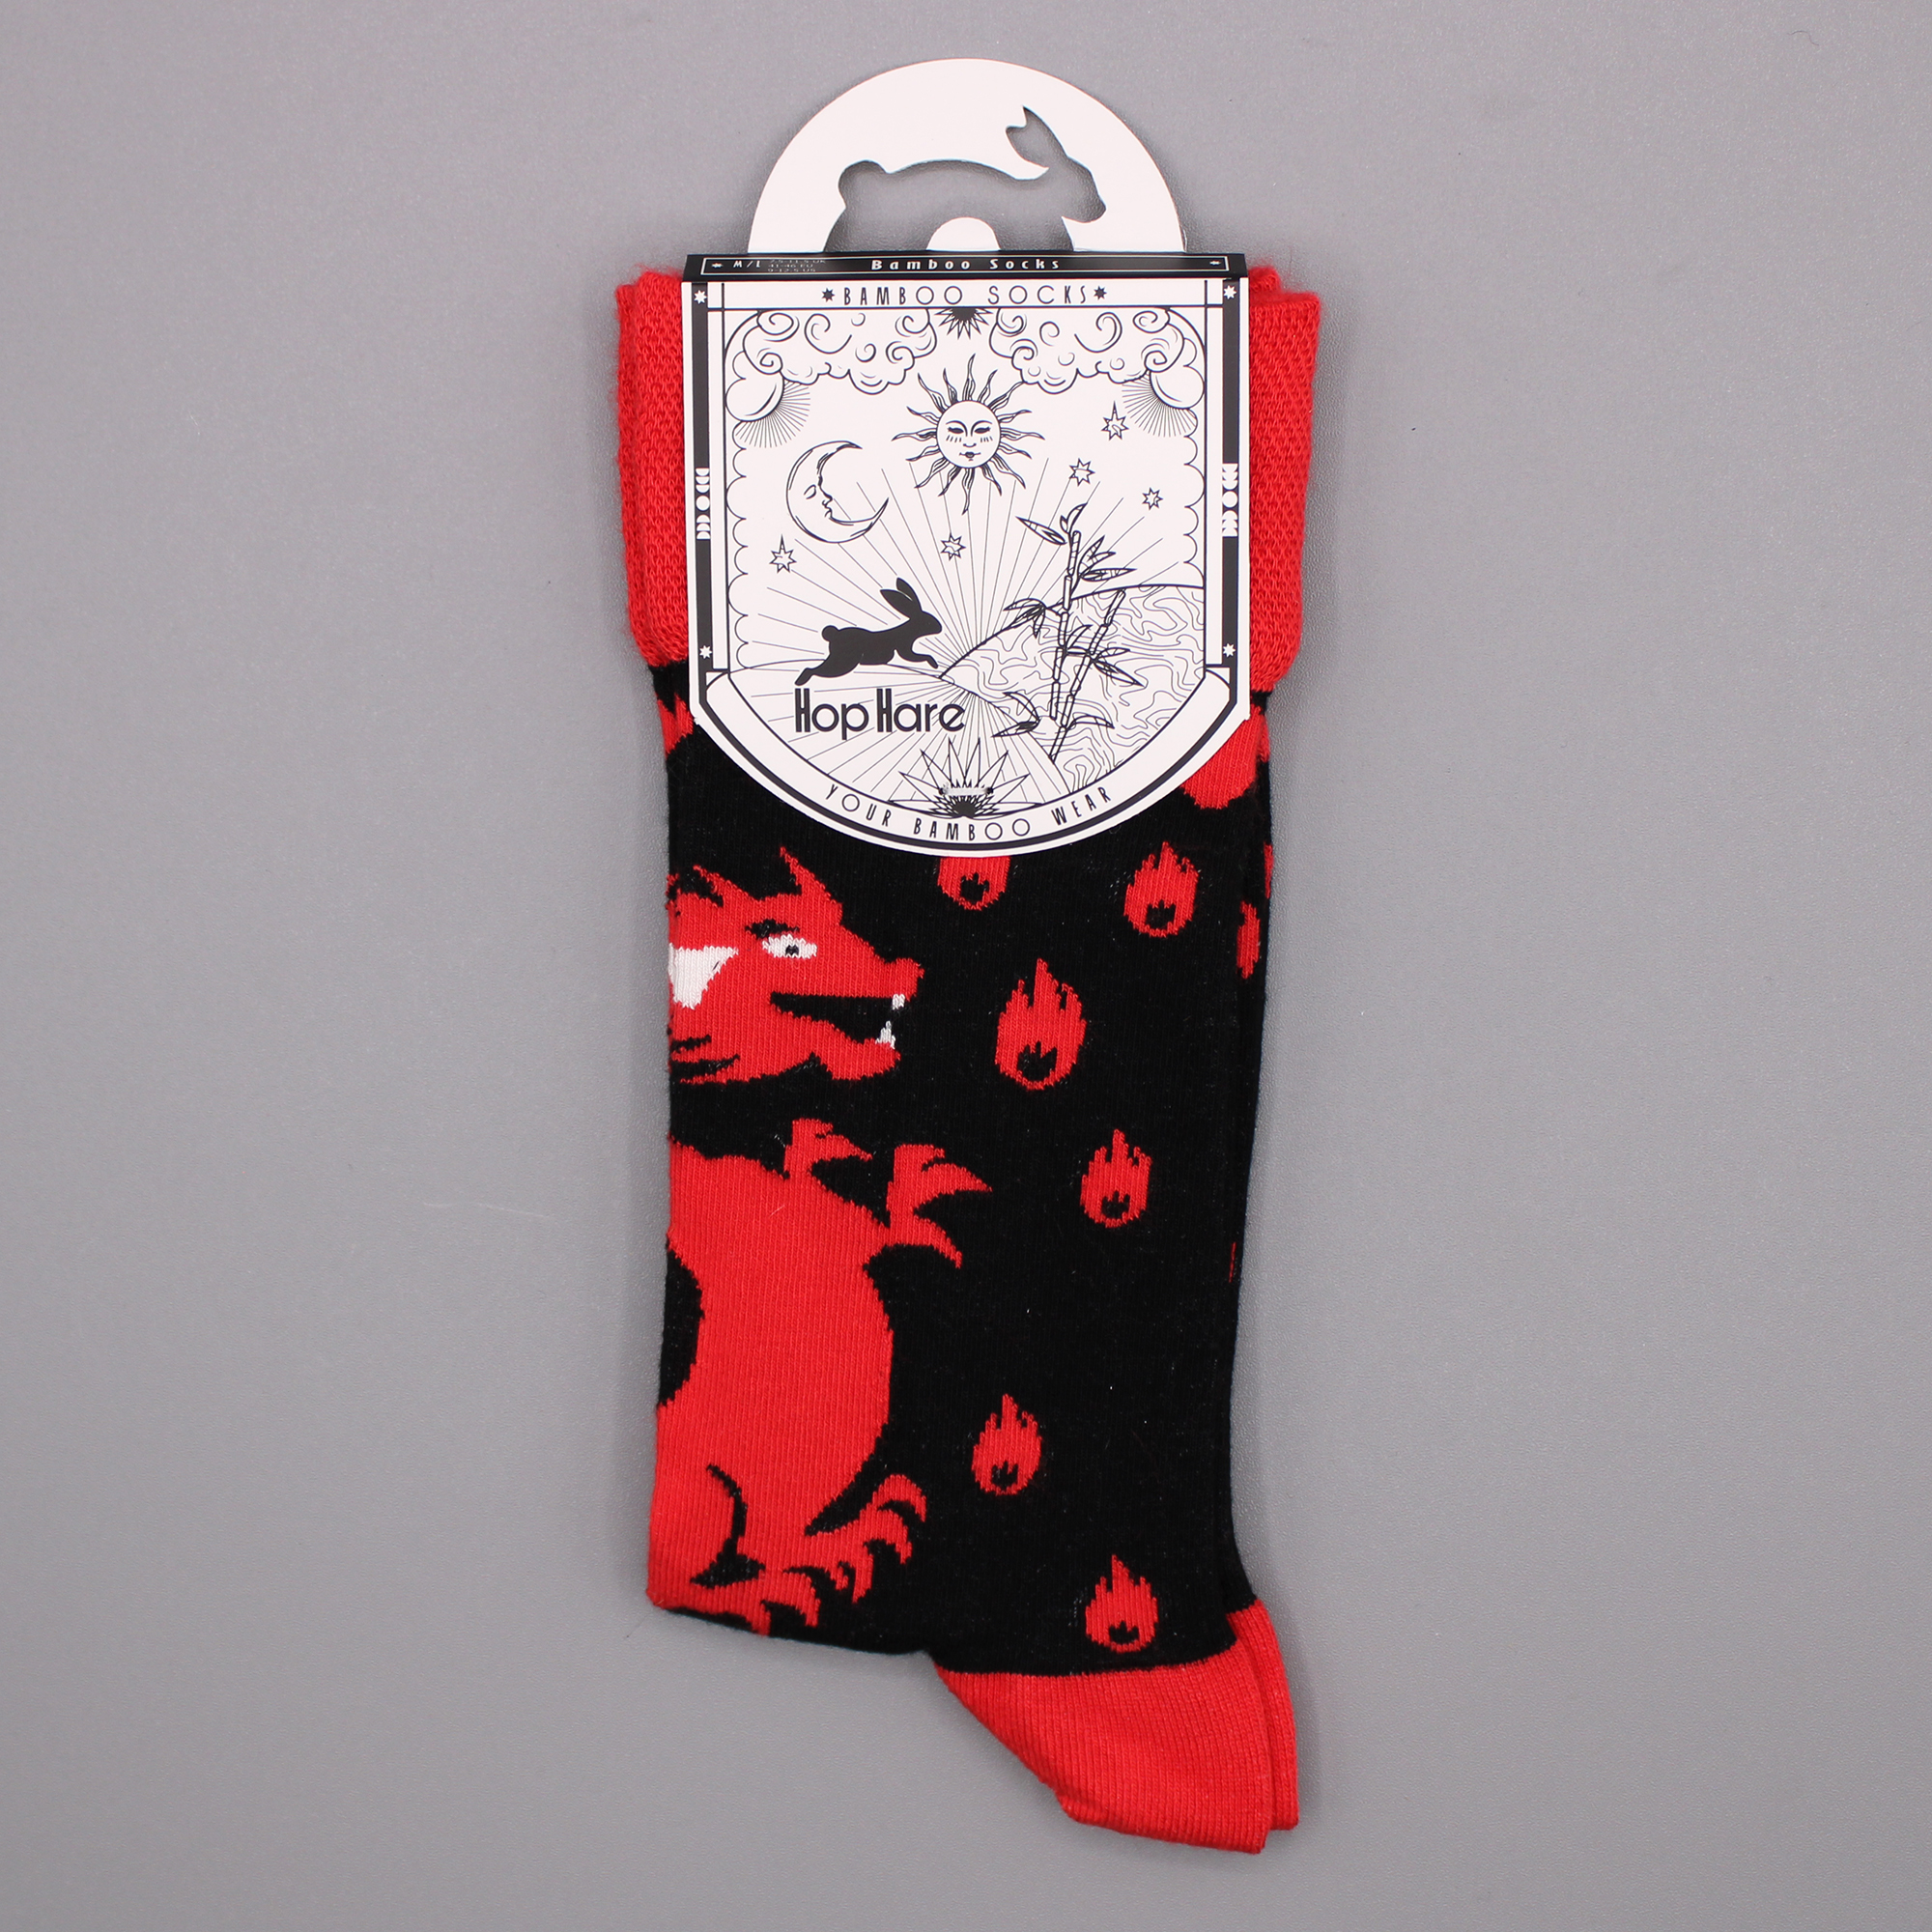 Hop Hare Bamboo Socks S/M - Red Dragons